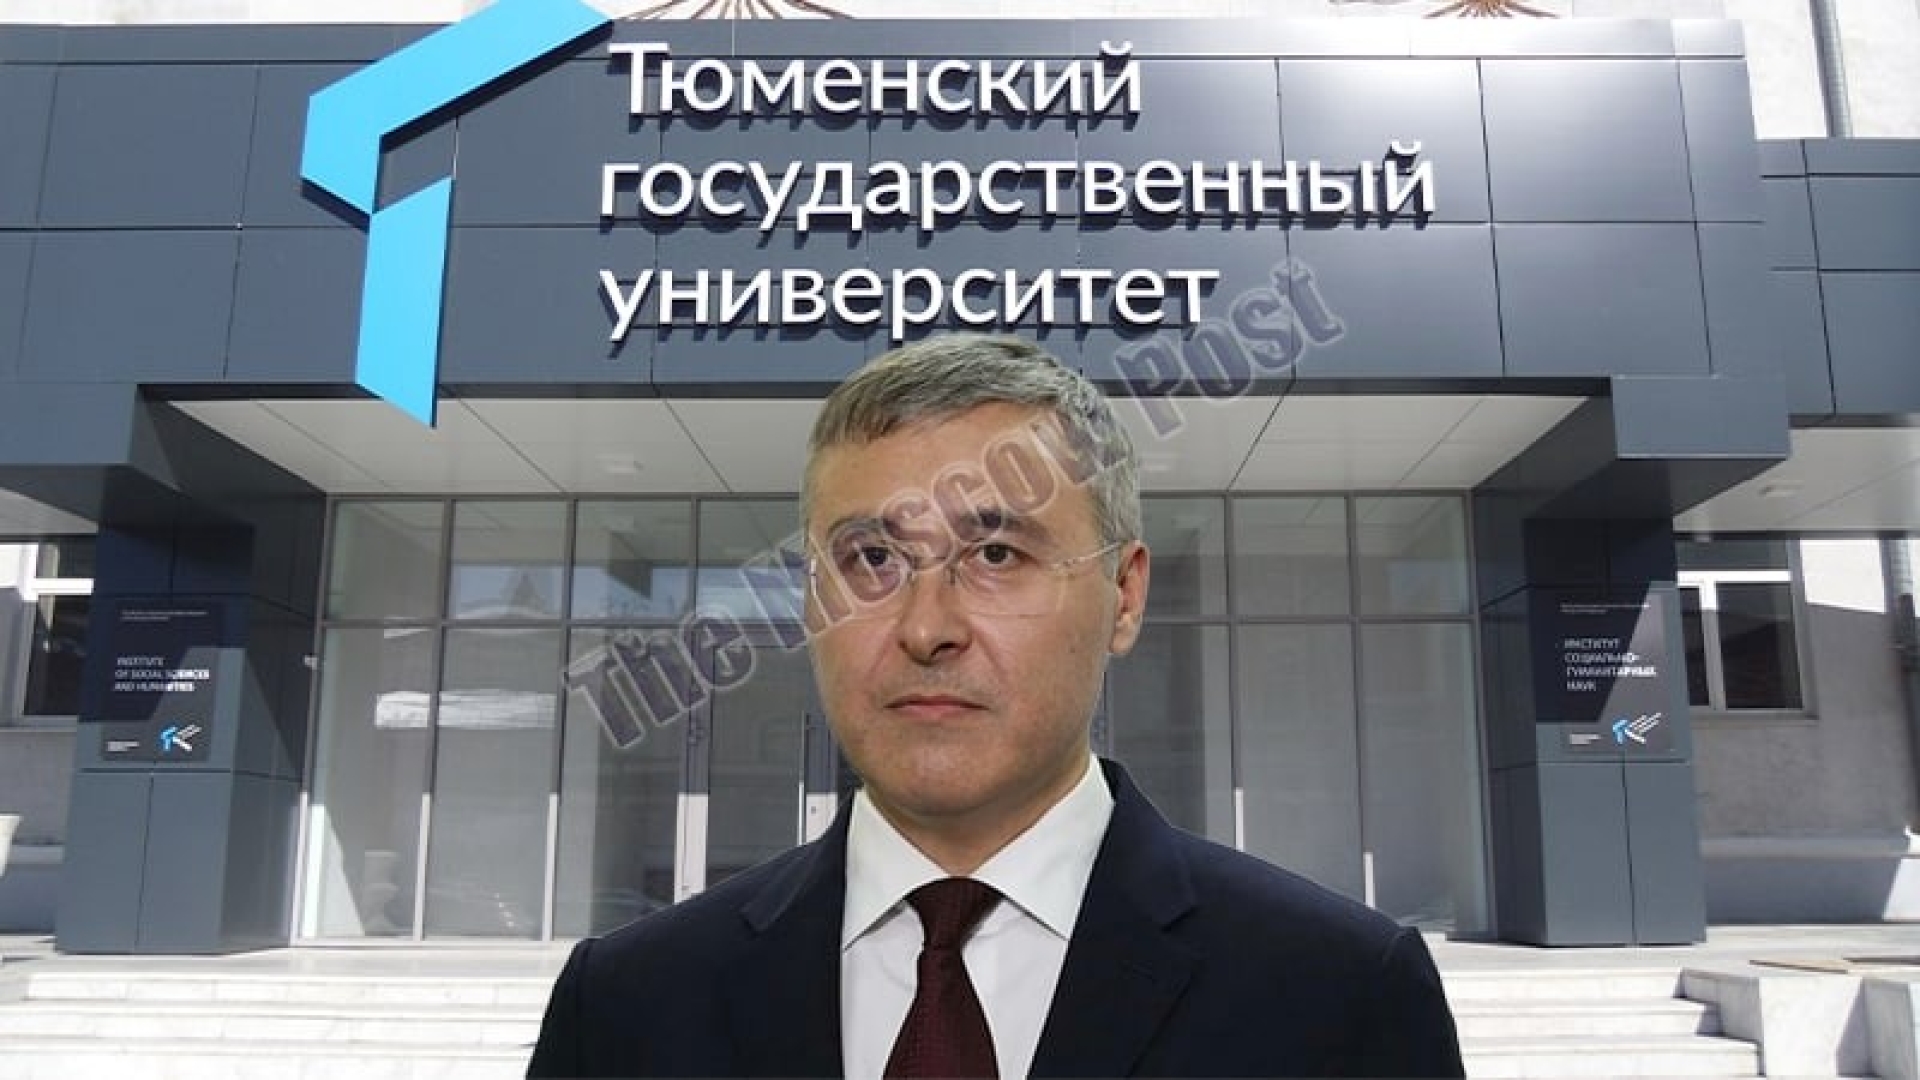 One contract, two contracts: how TyumGu "pleases" Minister Falkov